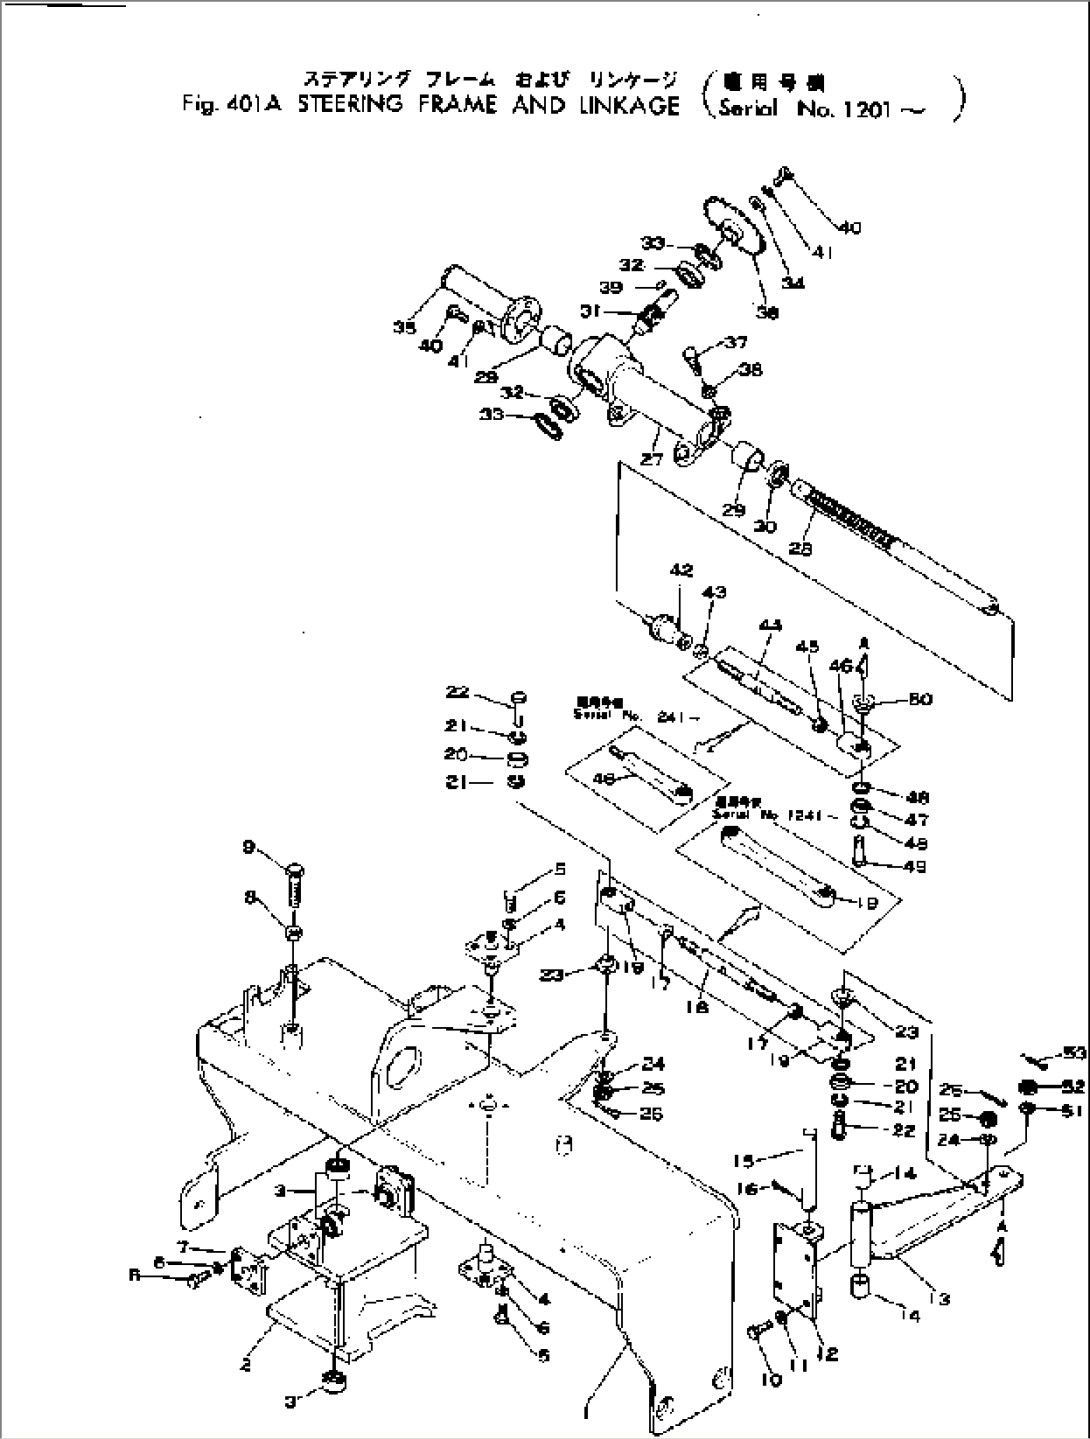 STEERING FRAME AND LINKAGE(#1201-)